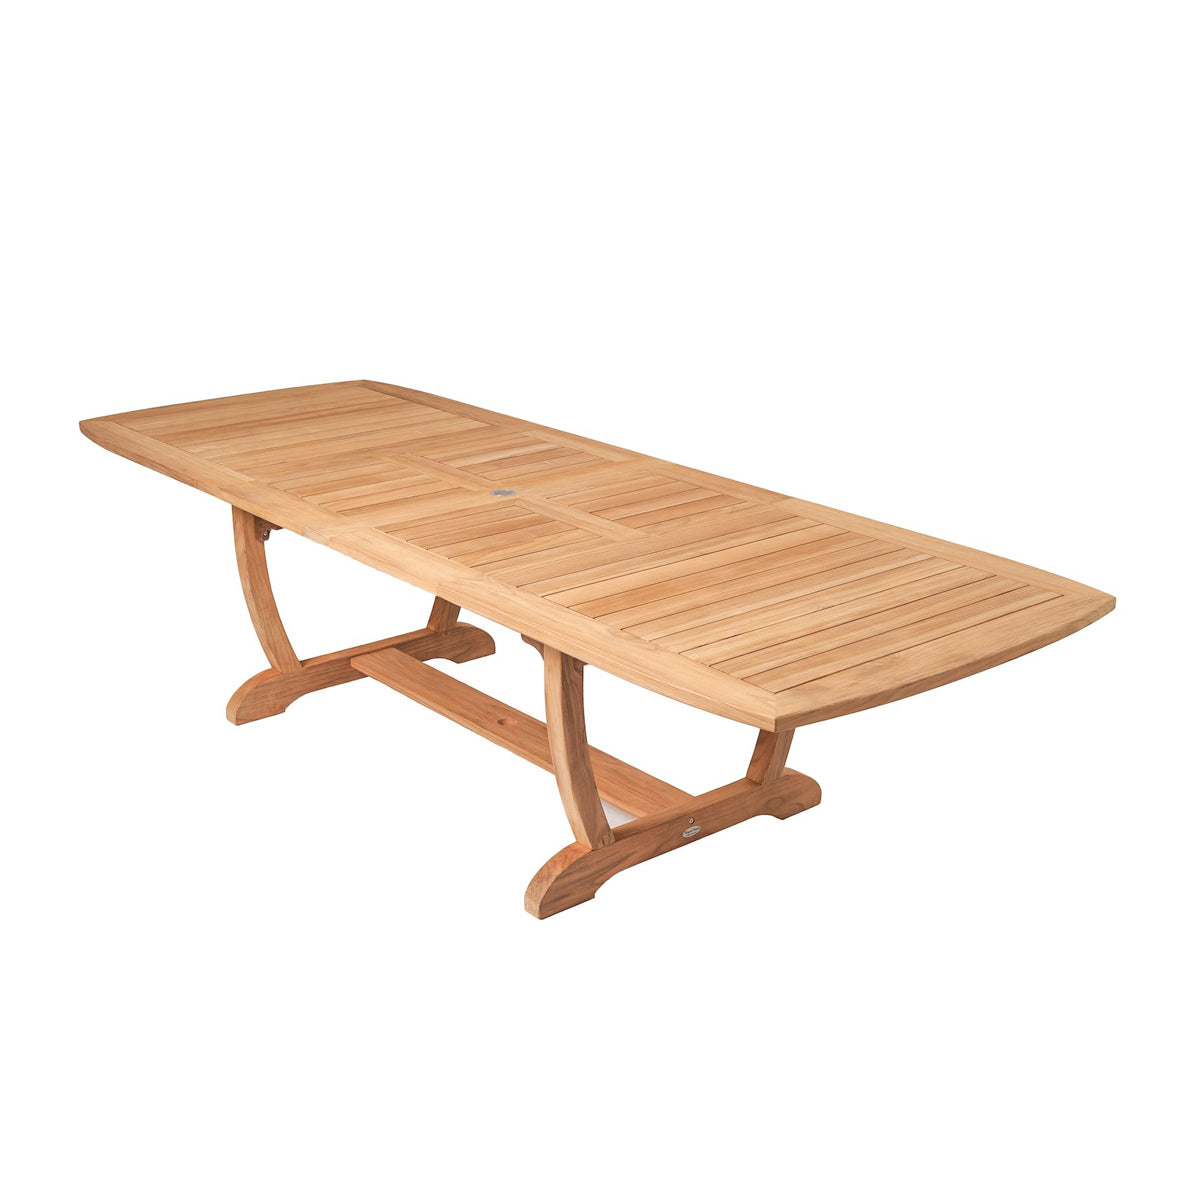 Double Leaf Expansion Dining Table